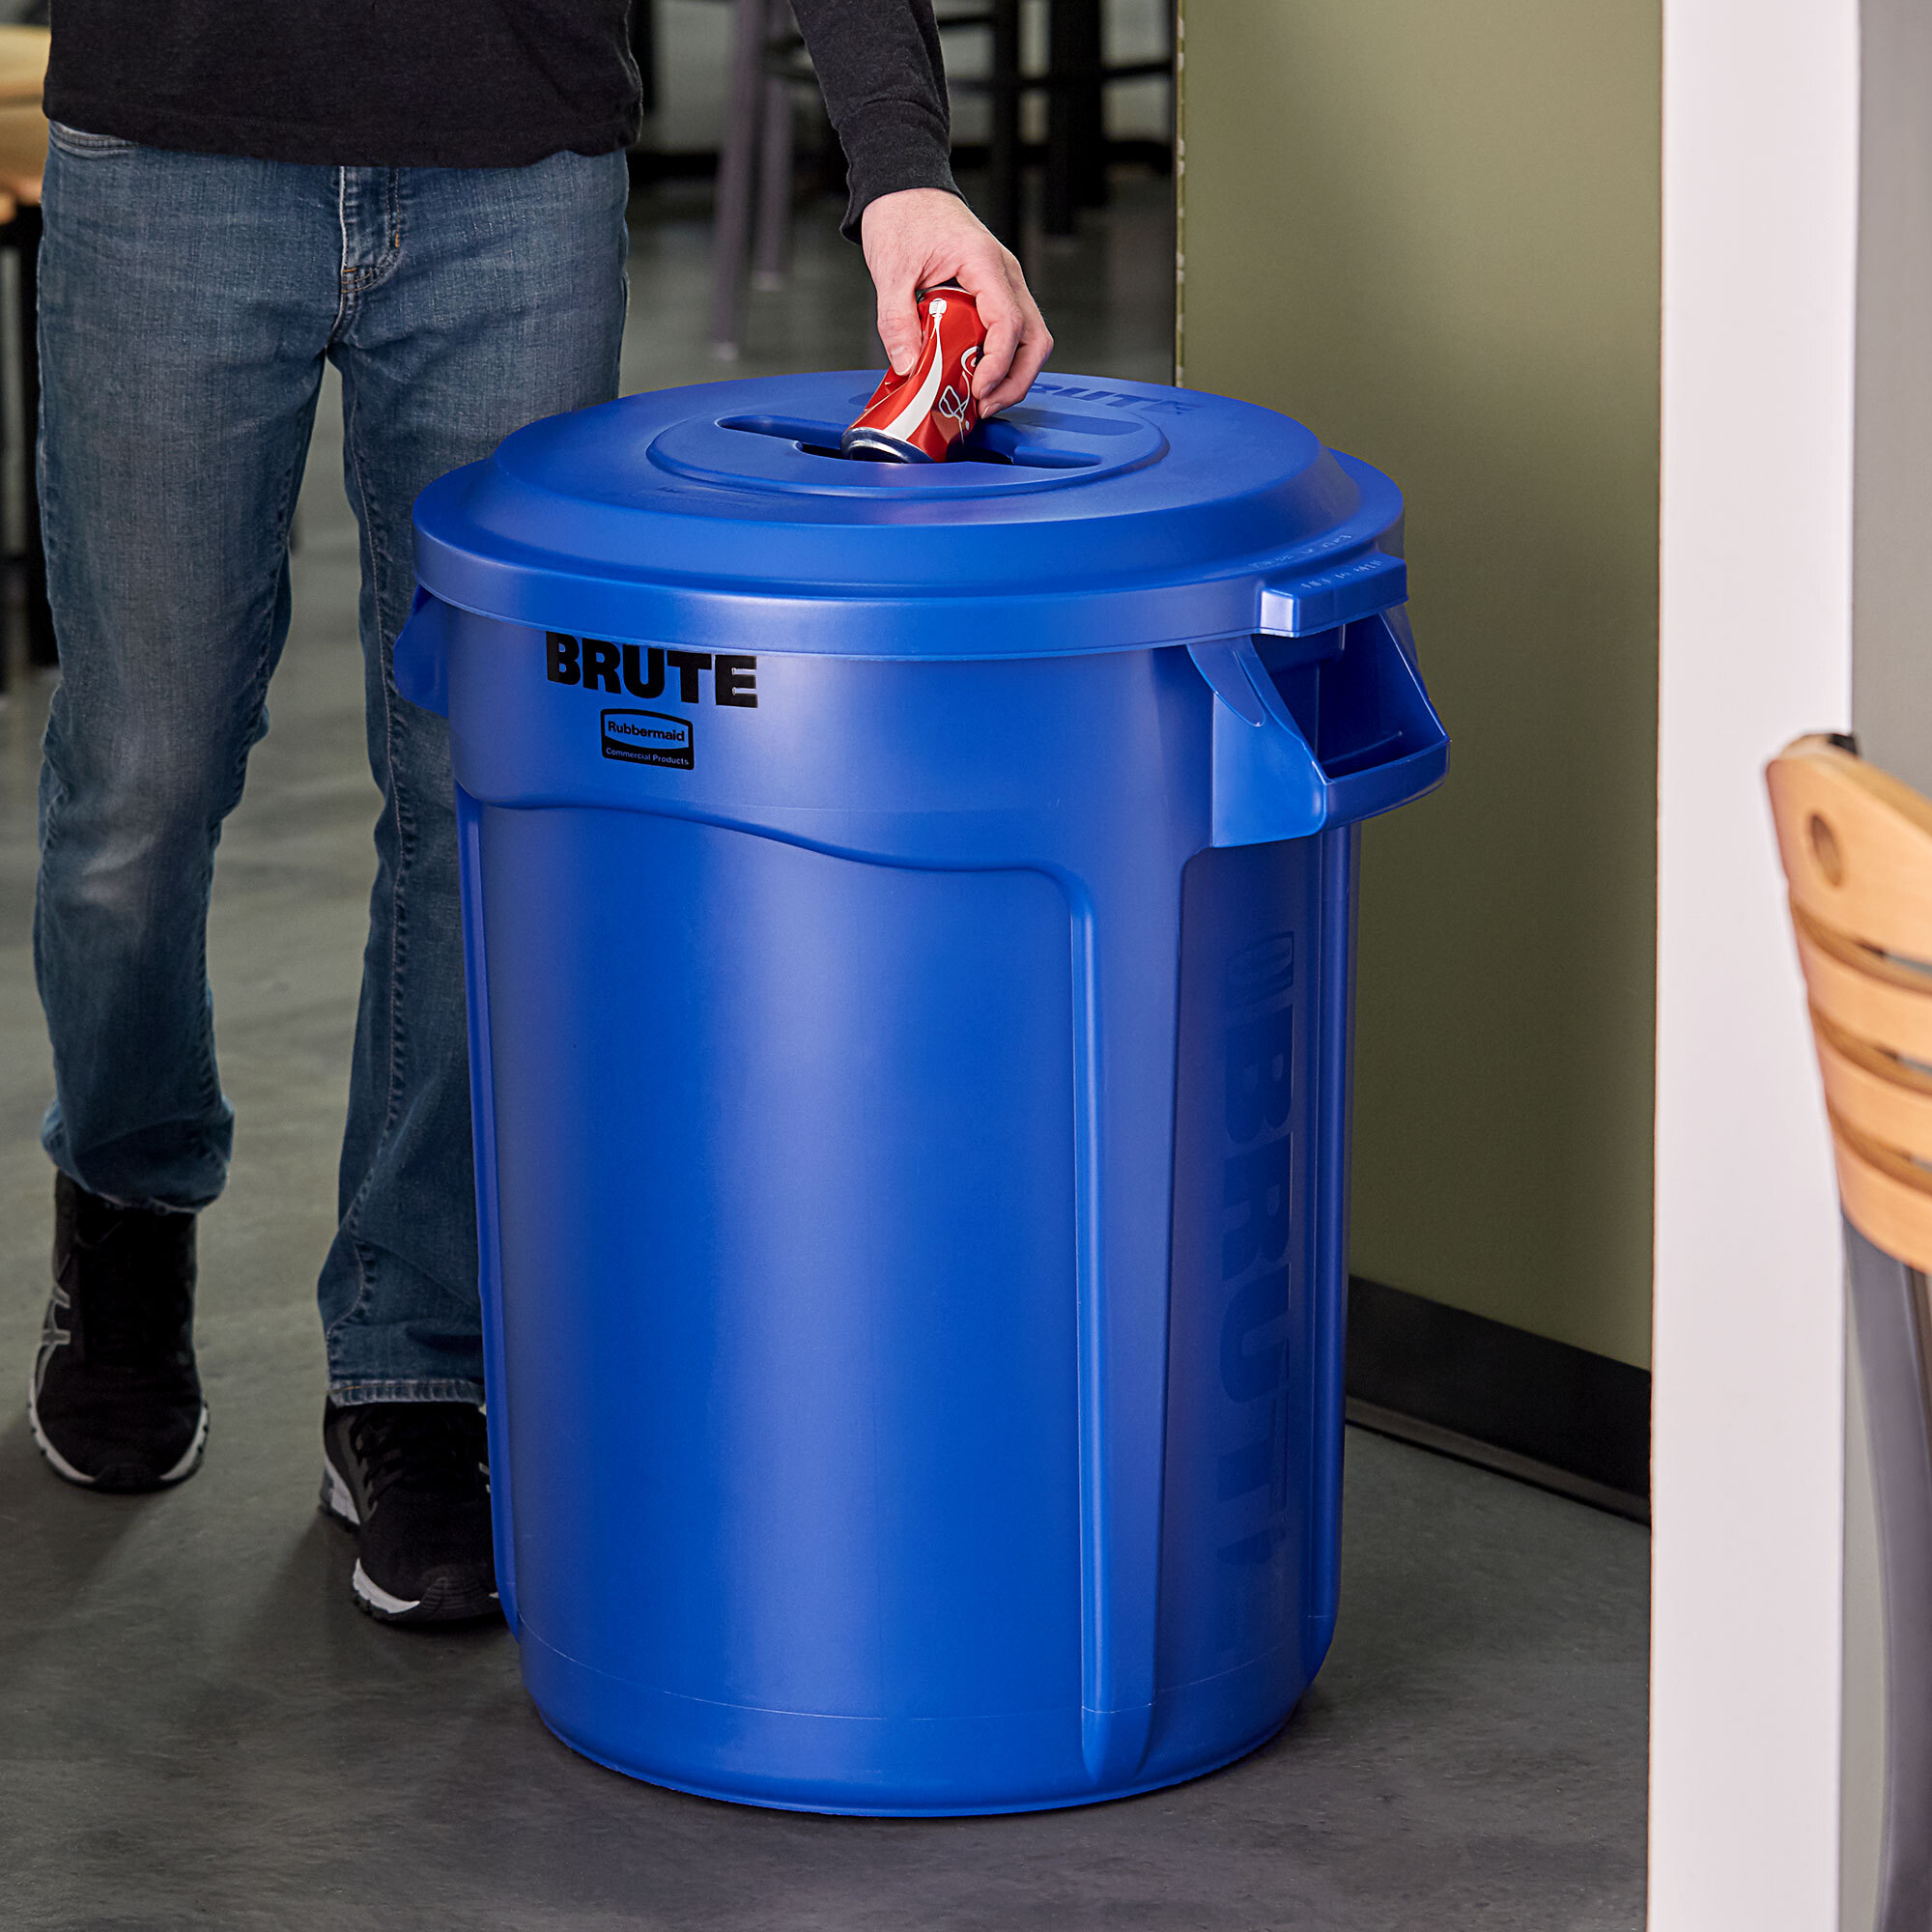 Rubbermaid Brute 32 Gallon Blue Round Trash Can And Mixed Recycle Lid